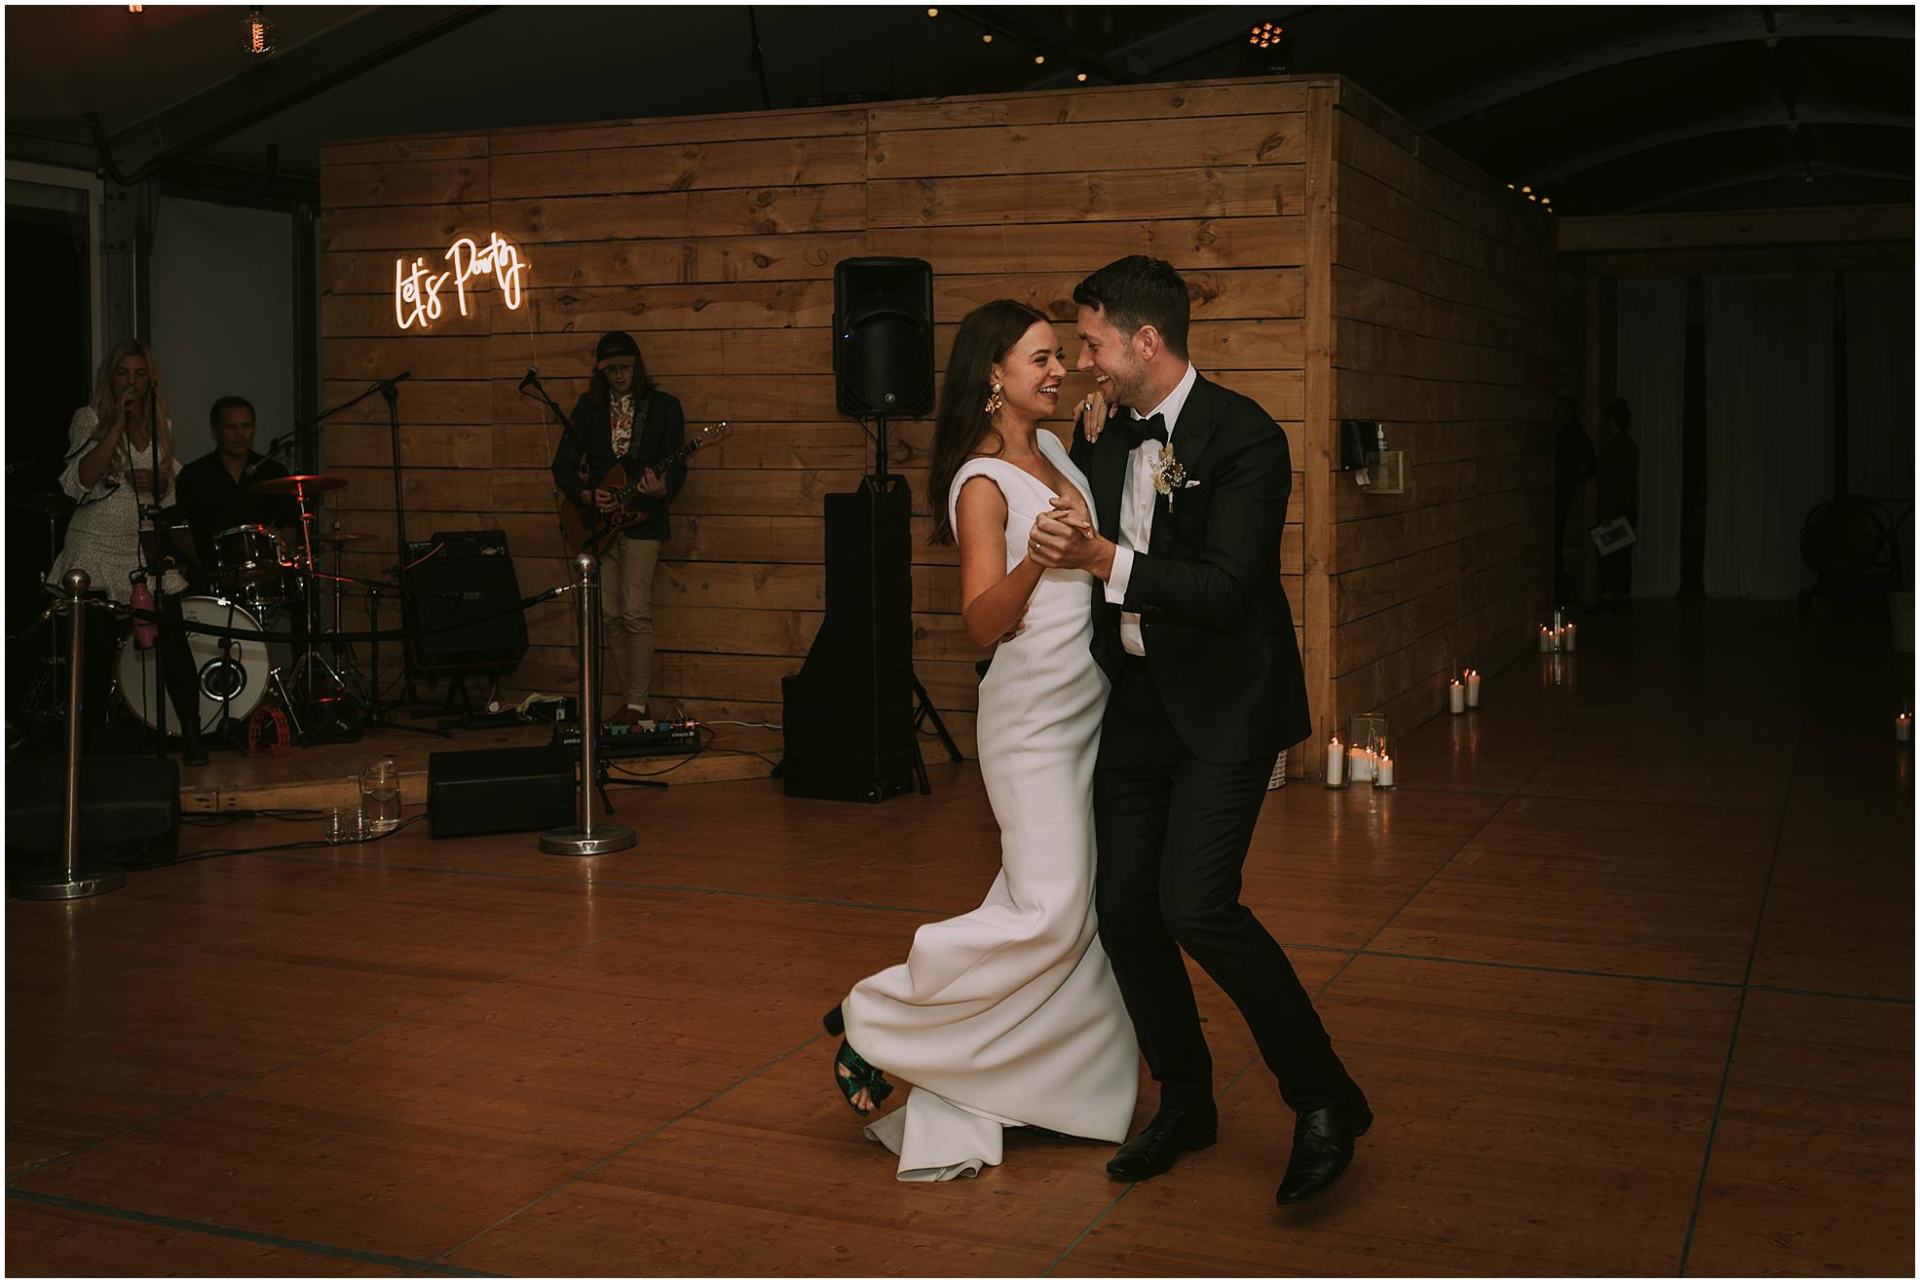 Charlotte Kiri Photography - Wedding Photography of a bride wearing an elegant fitted low V-necked dress as she dances with her groom in a black tuxedo, in front of a band at the wedding reception in Wanaka, New Zealand.